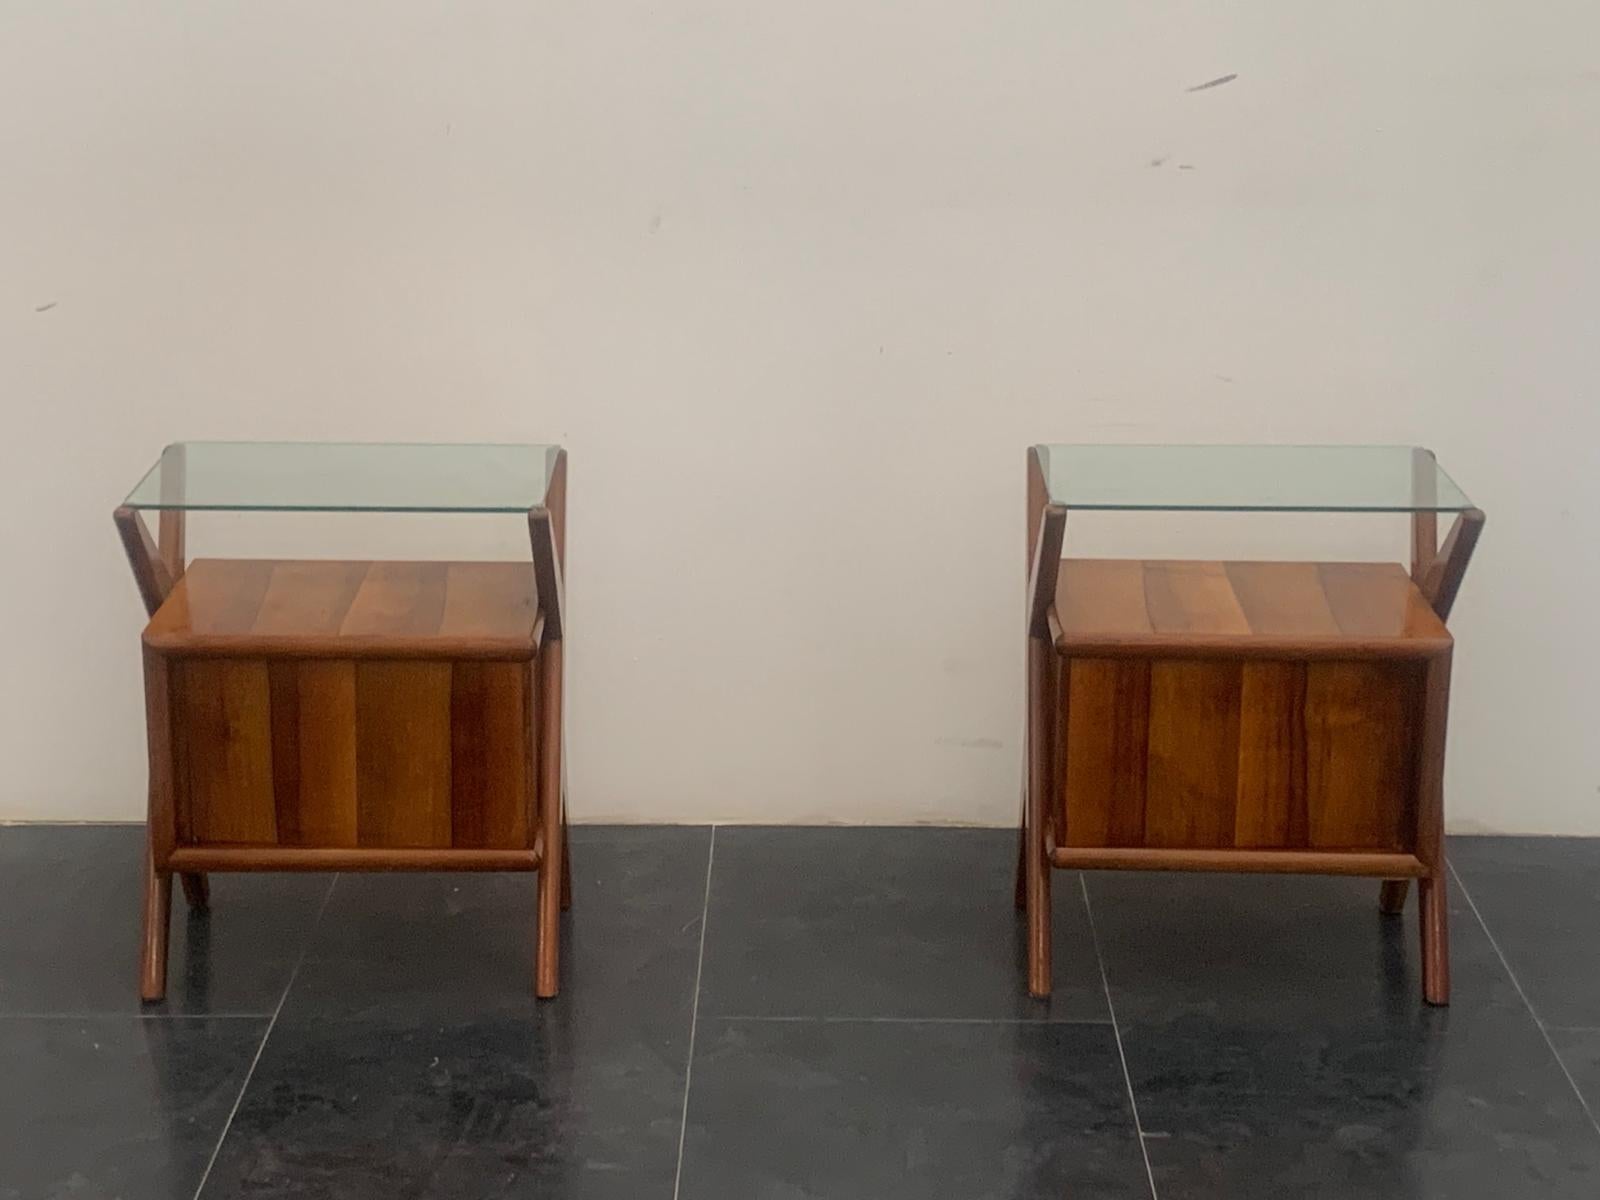 Pair of rosewood and glass bedside tables, 1960s. Excellent quality of materials and construction, generous thicknesses, beautiful rosewood selection. The sides have diagonal pilasters that intertwine, supporting the body and glass top. In the